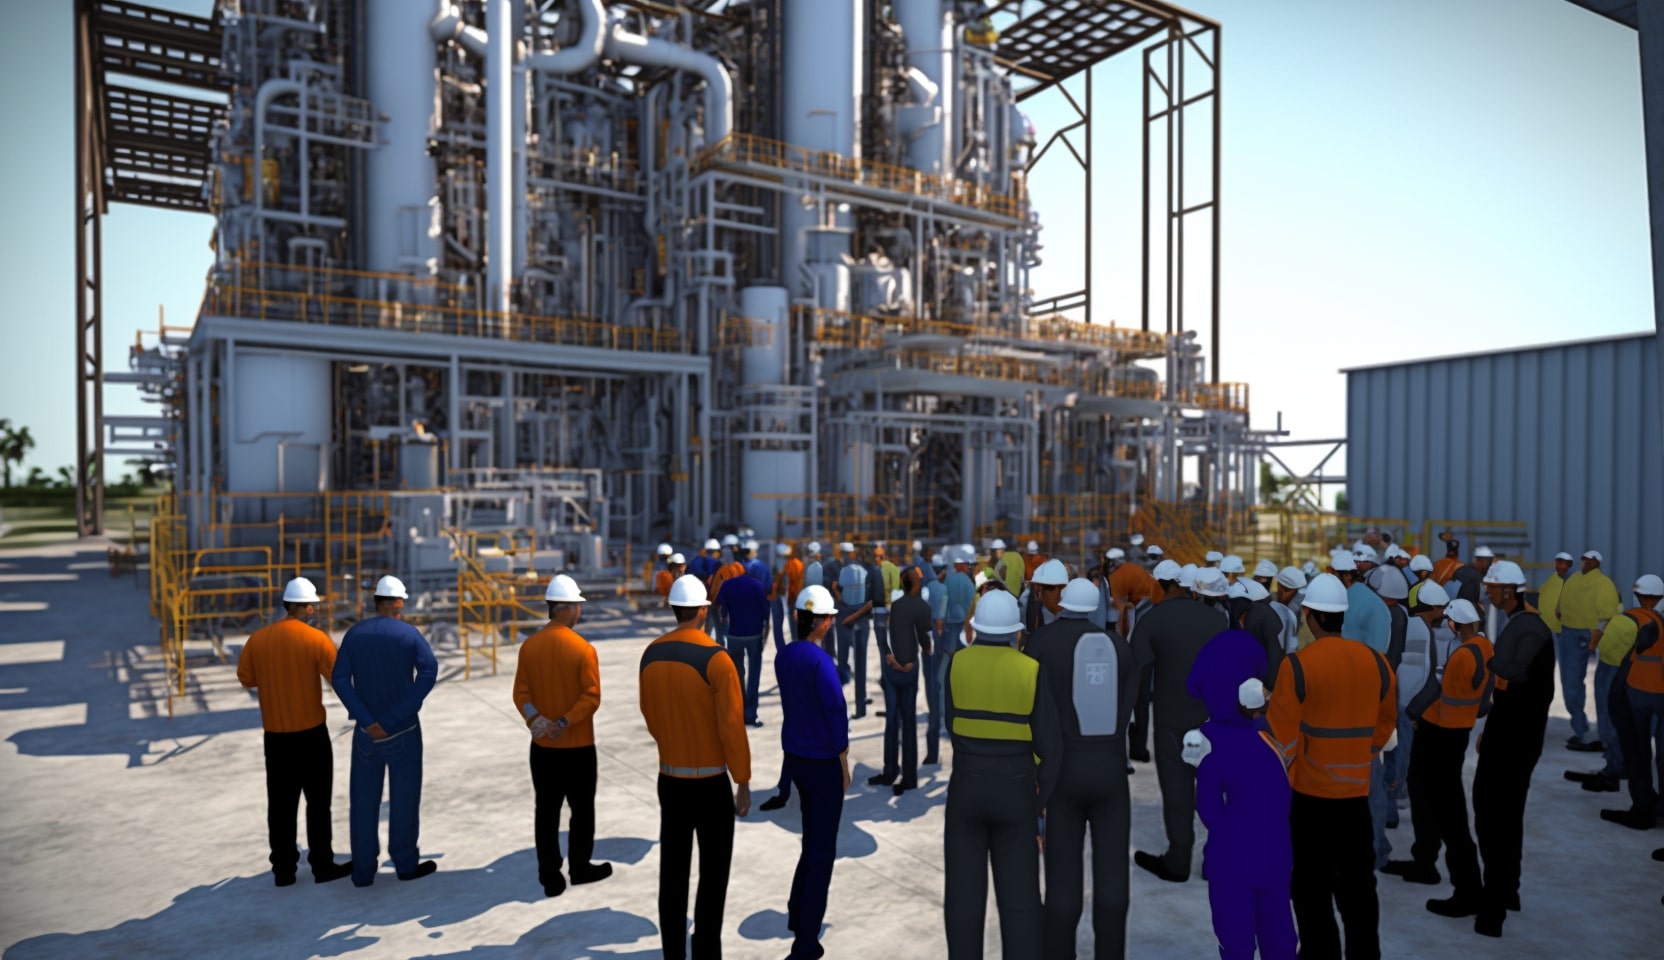 VR safety Trainings In Refinery